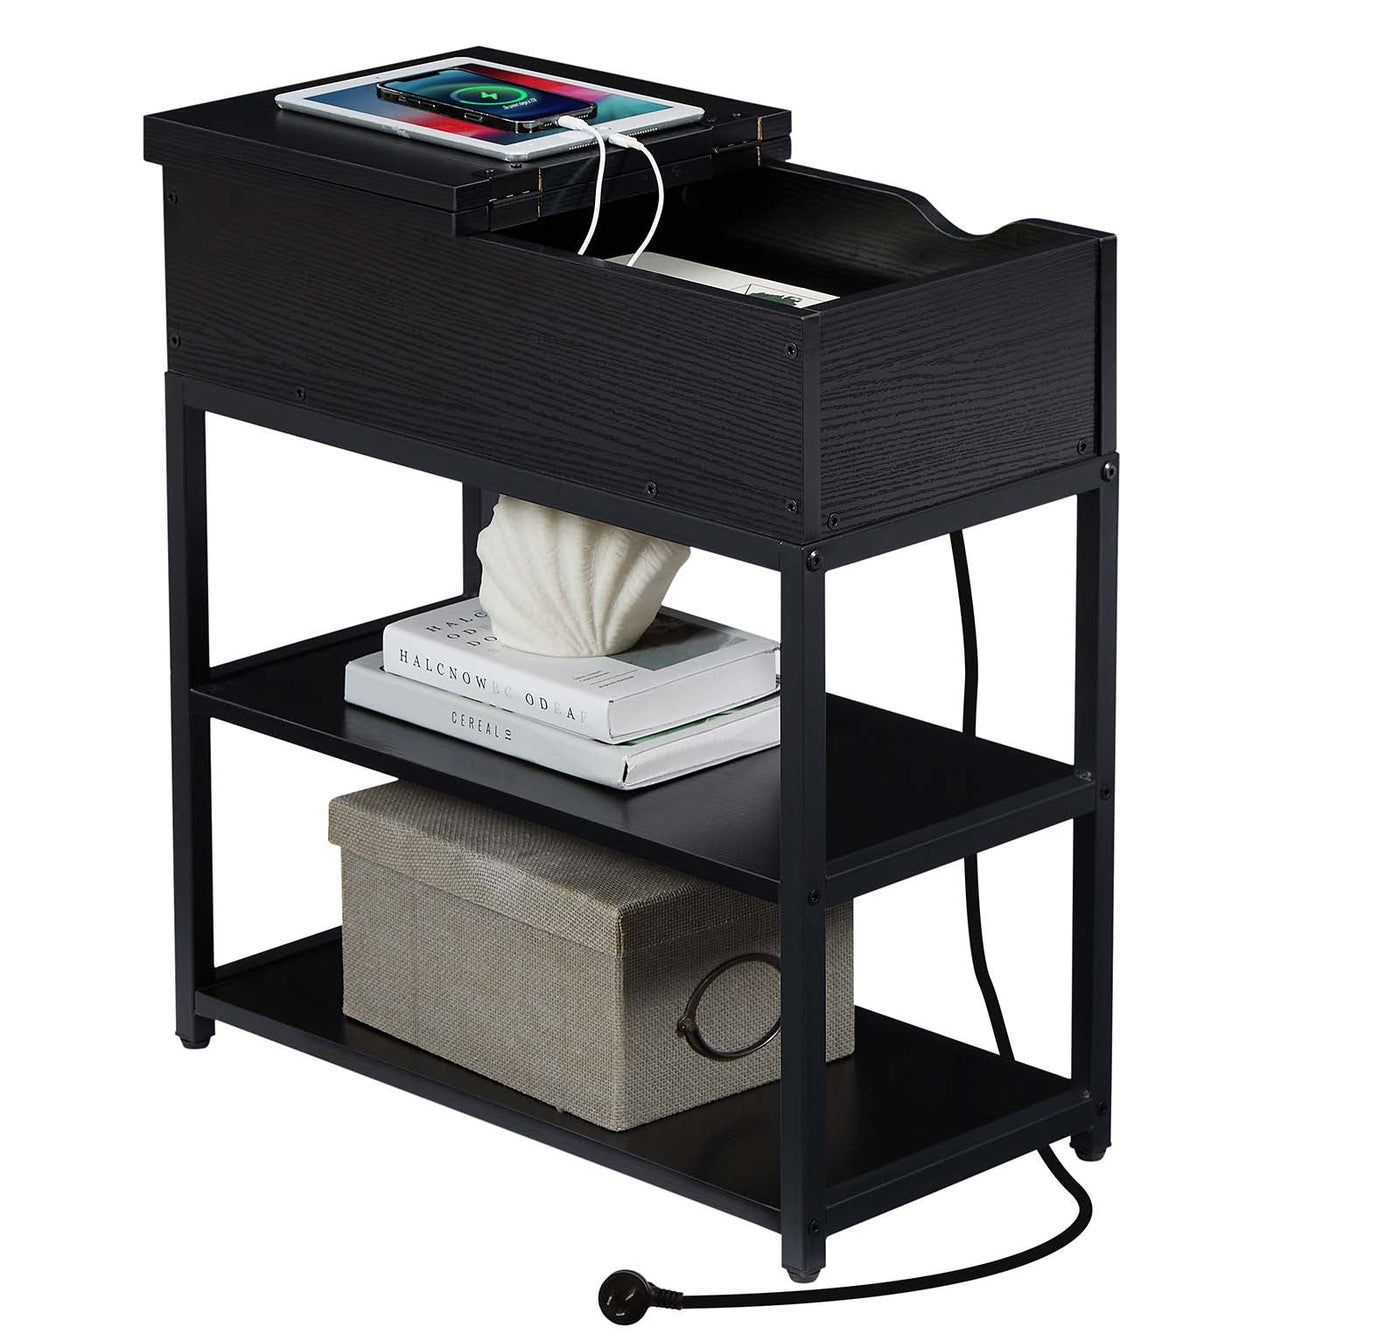 Casadiso Sofa Side Table with Integrated Charging Station - Multi-Tier Black Side Table with Built-in Power Board (Casadiso Saiph Pro)